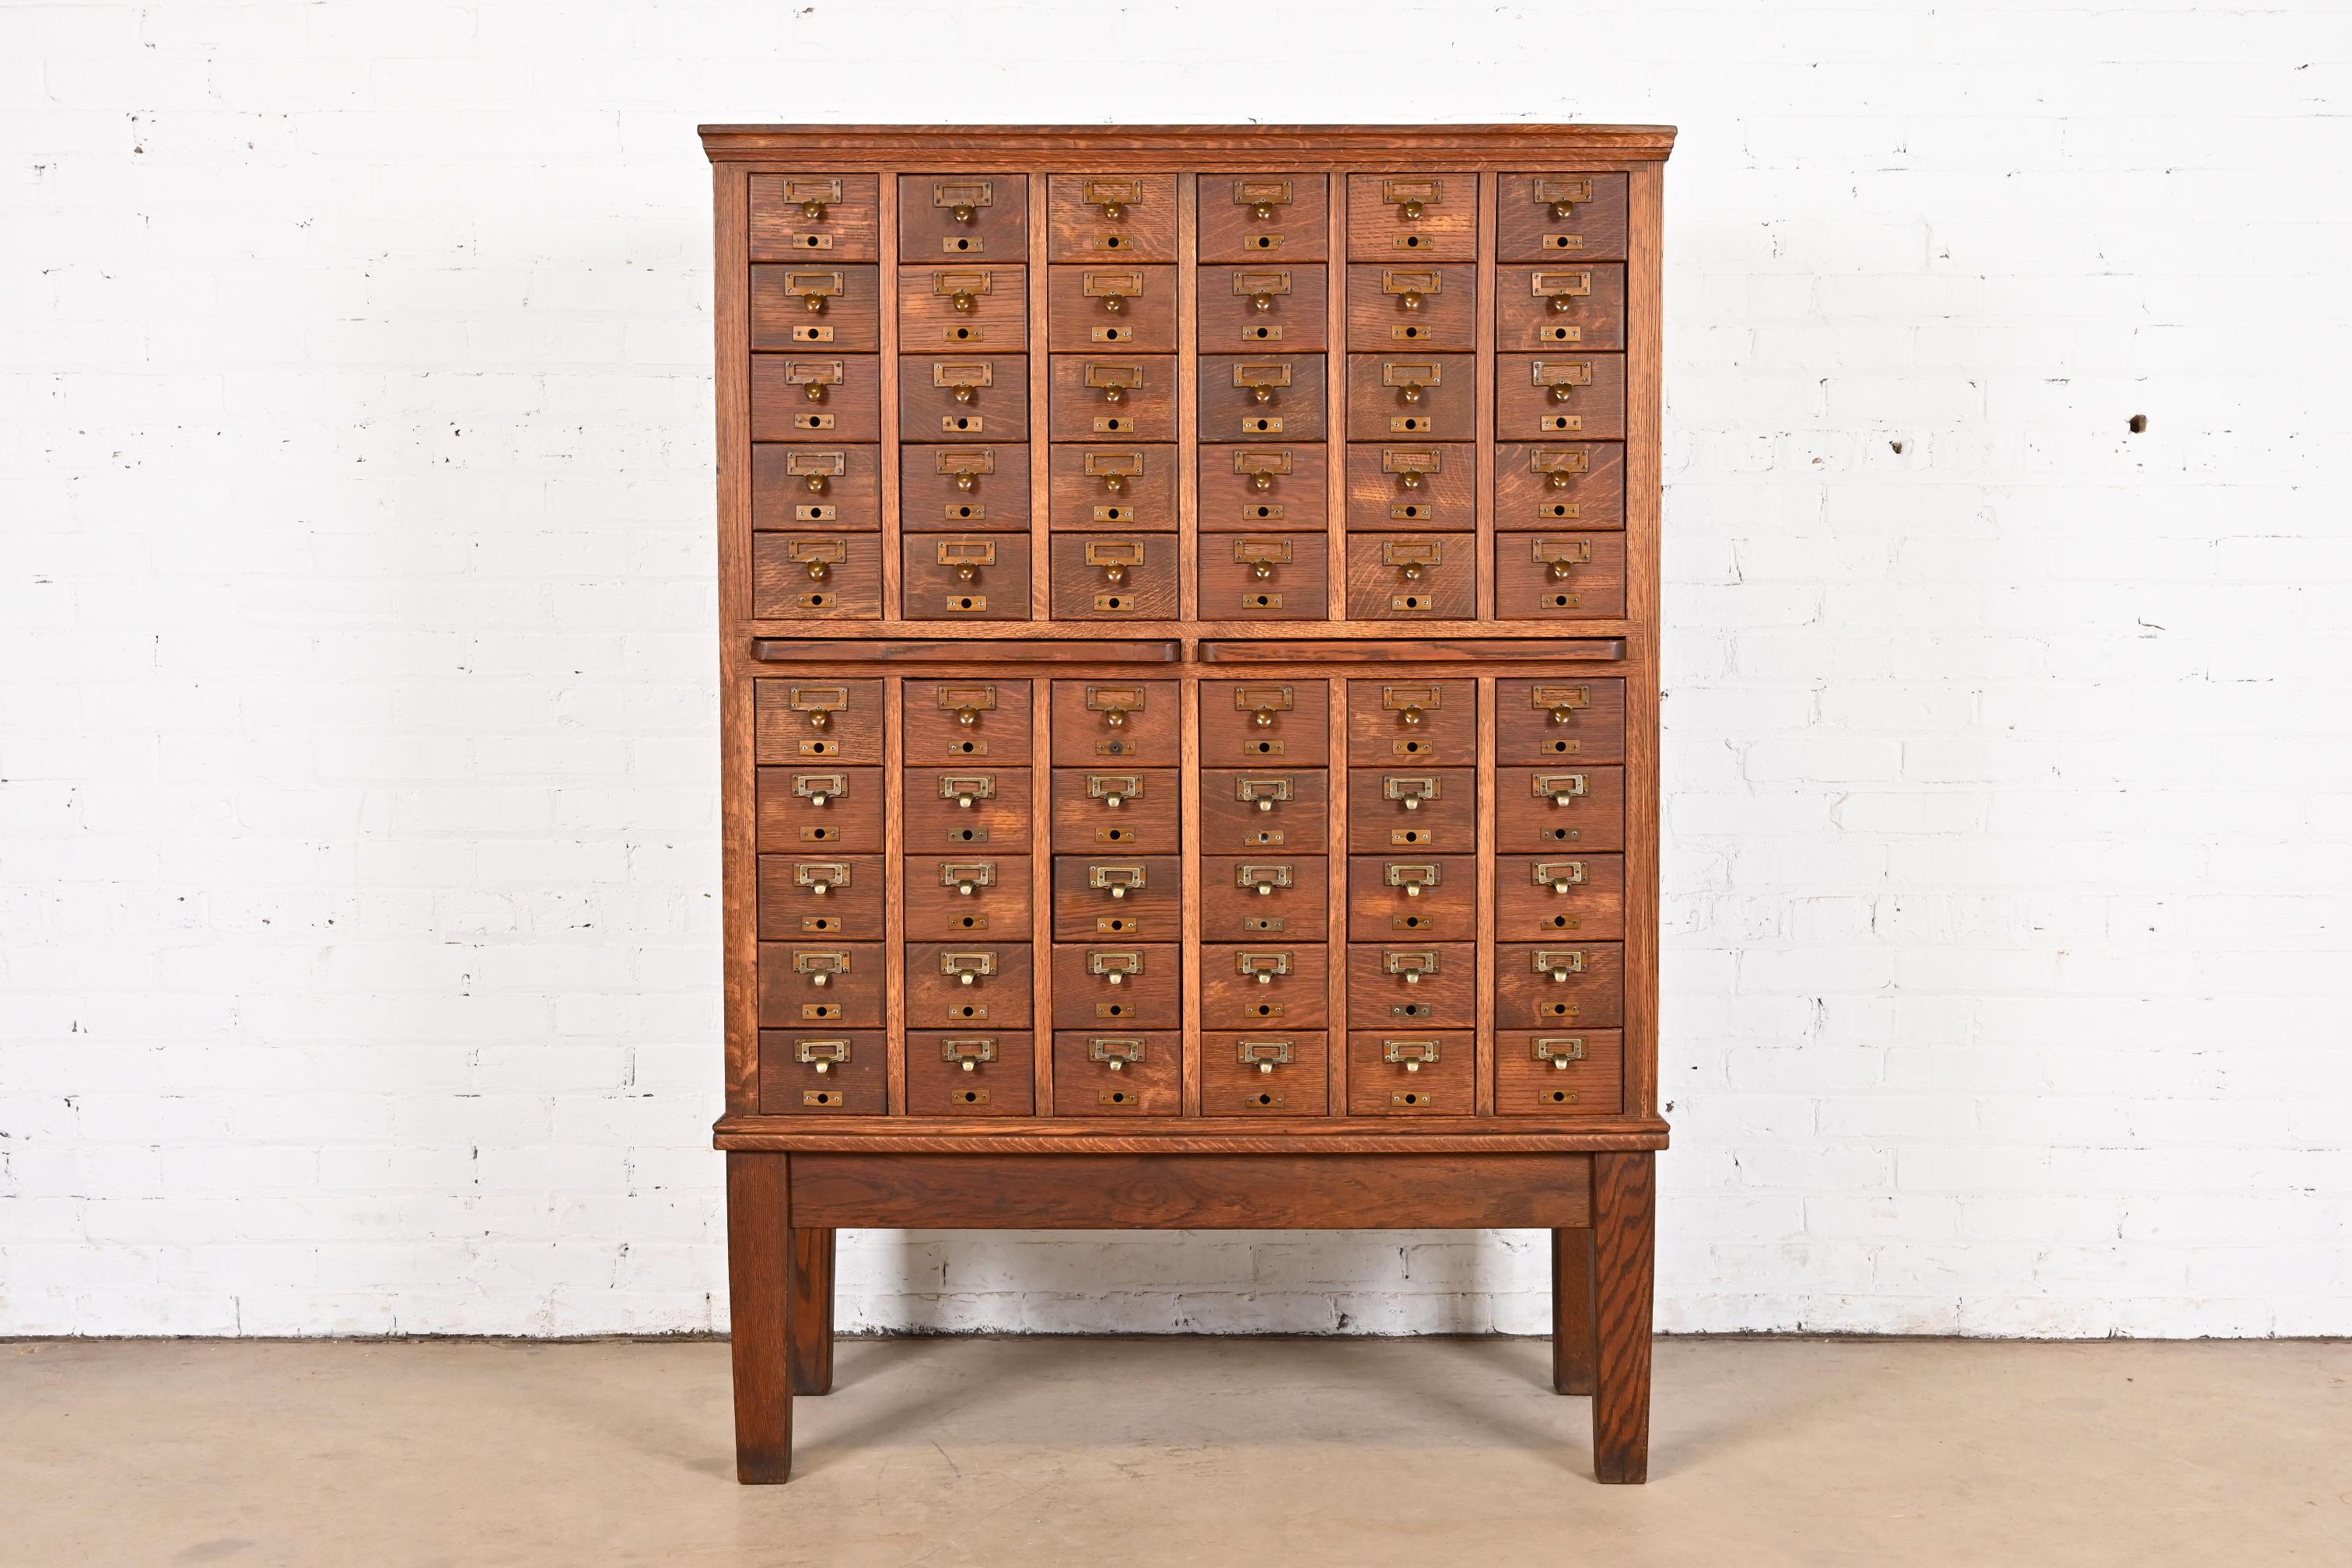 A rare and exceptional antique Arts & Crafts oak 60-drawer card catalog or file cabinet with two pull-out writing tablets

USA, Circa 1900

Solid quarter sawn oak, with brass hardware, and inset leather top writing tablets.

Measures: 42.5